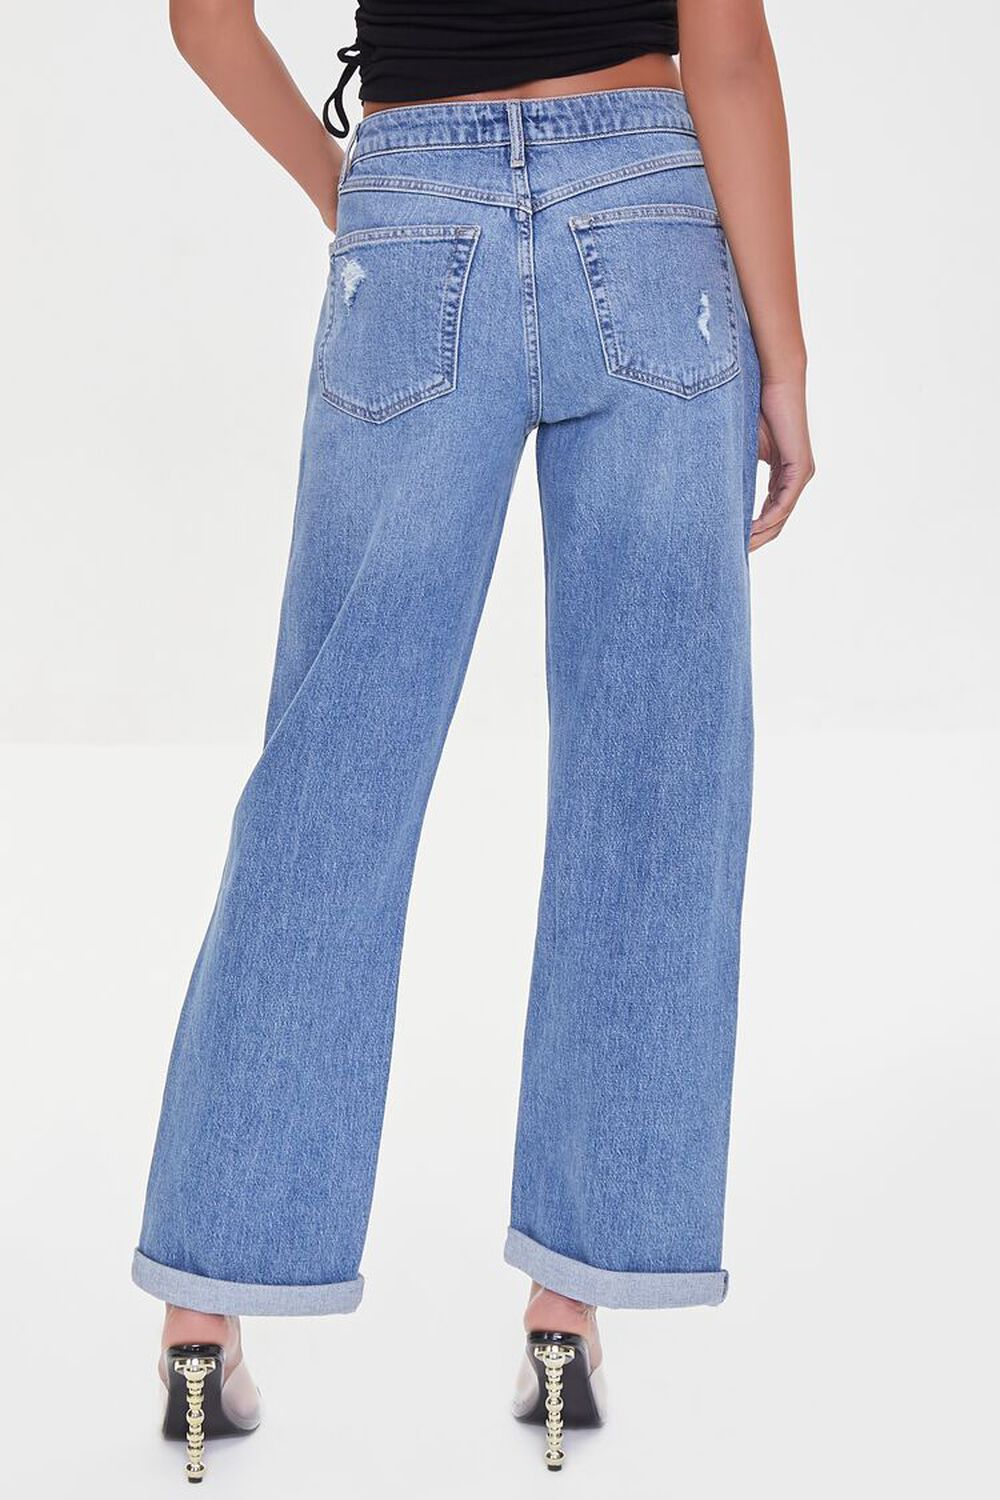 90s Fit Straight-Leg Jeans